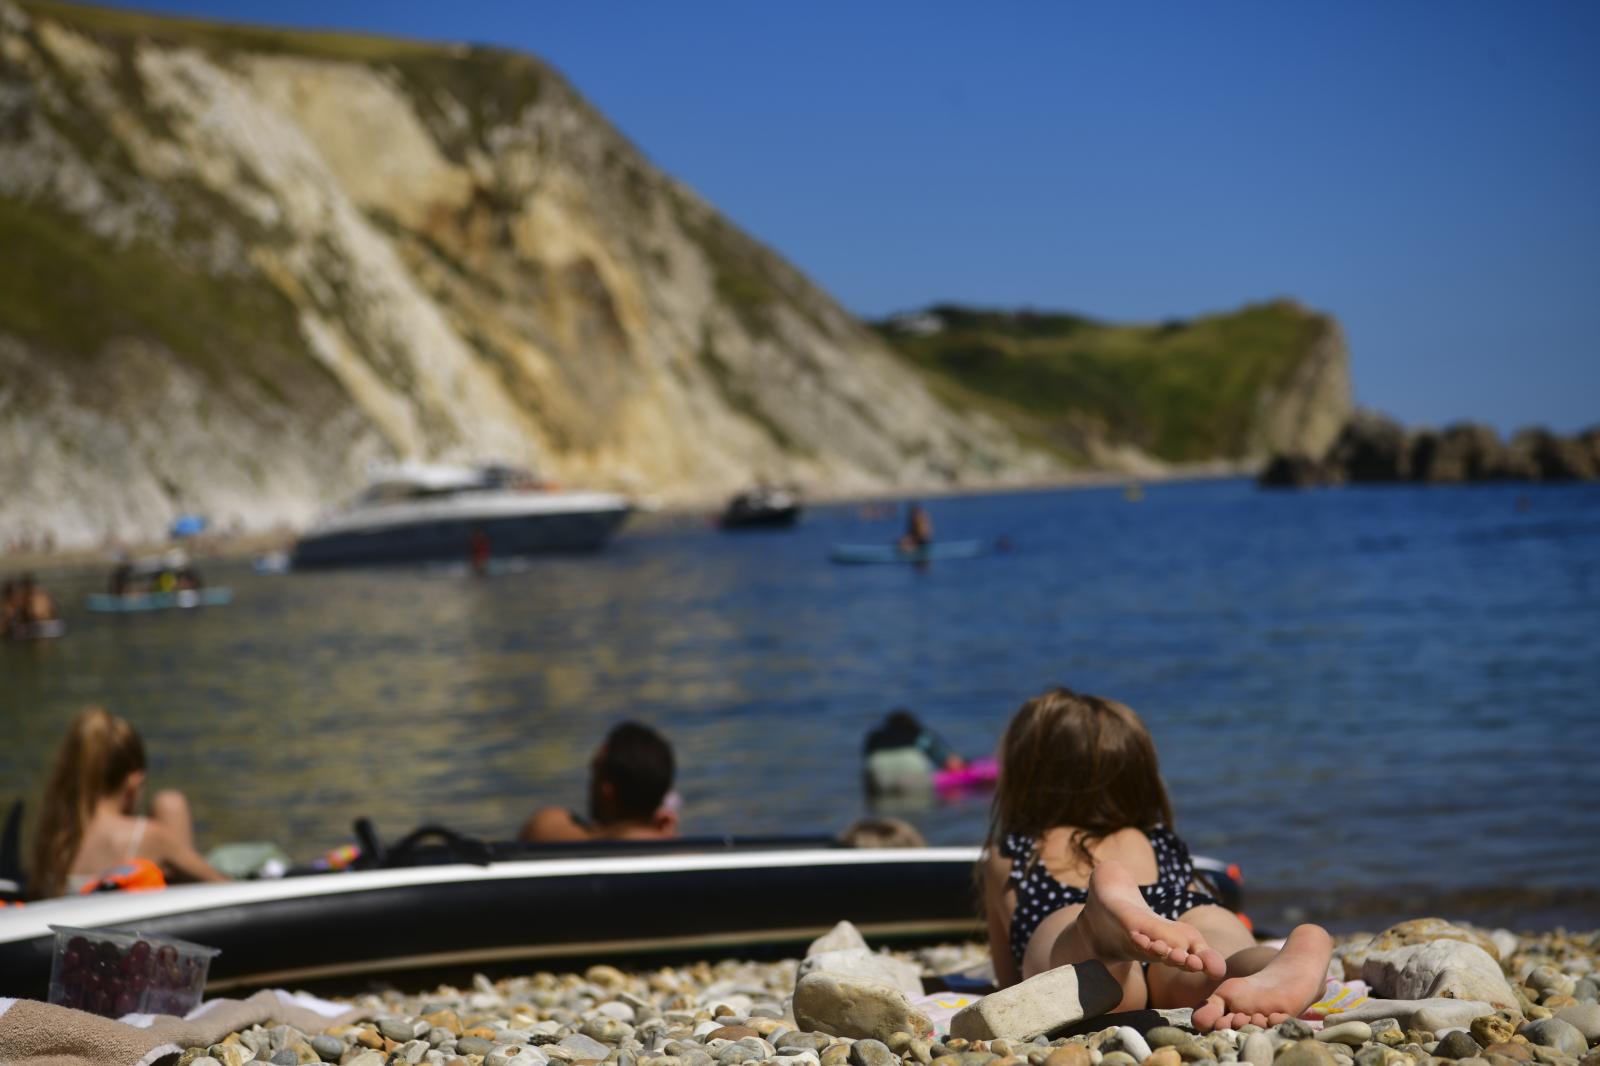 Image from Daily Life UK - Durdle Door near Bournemouth